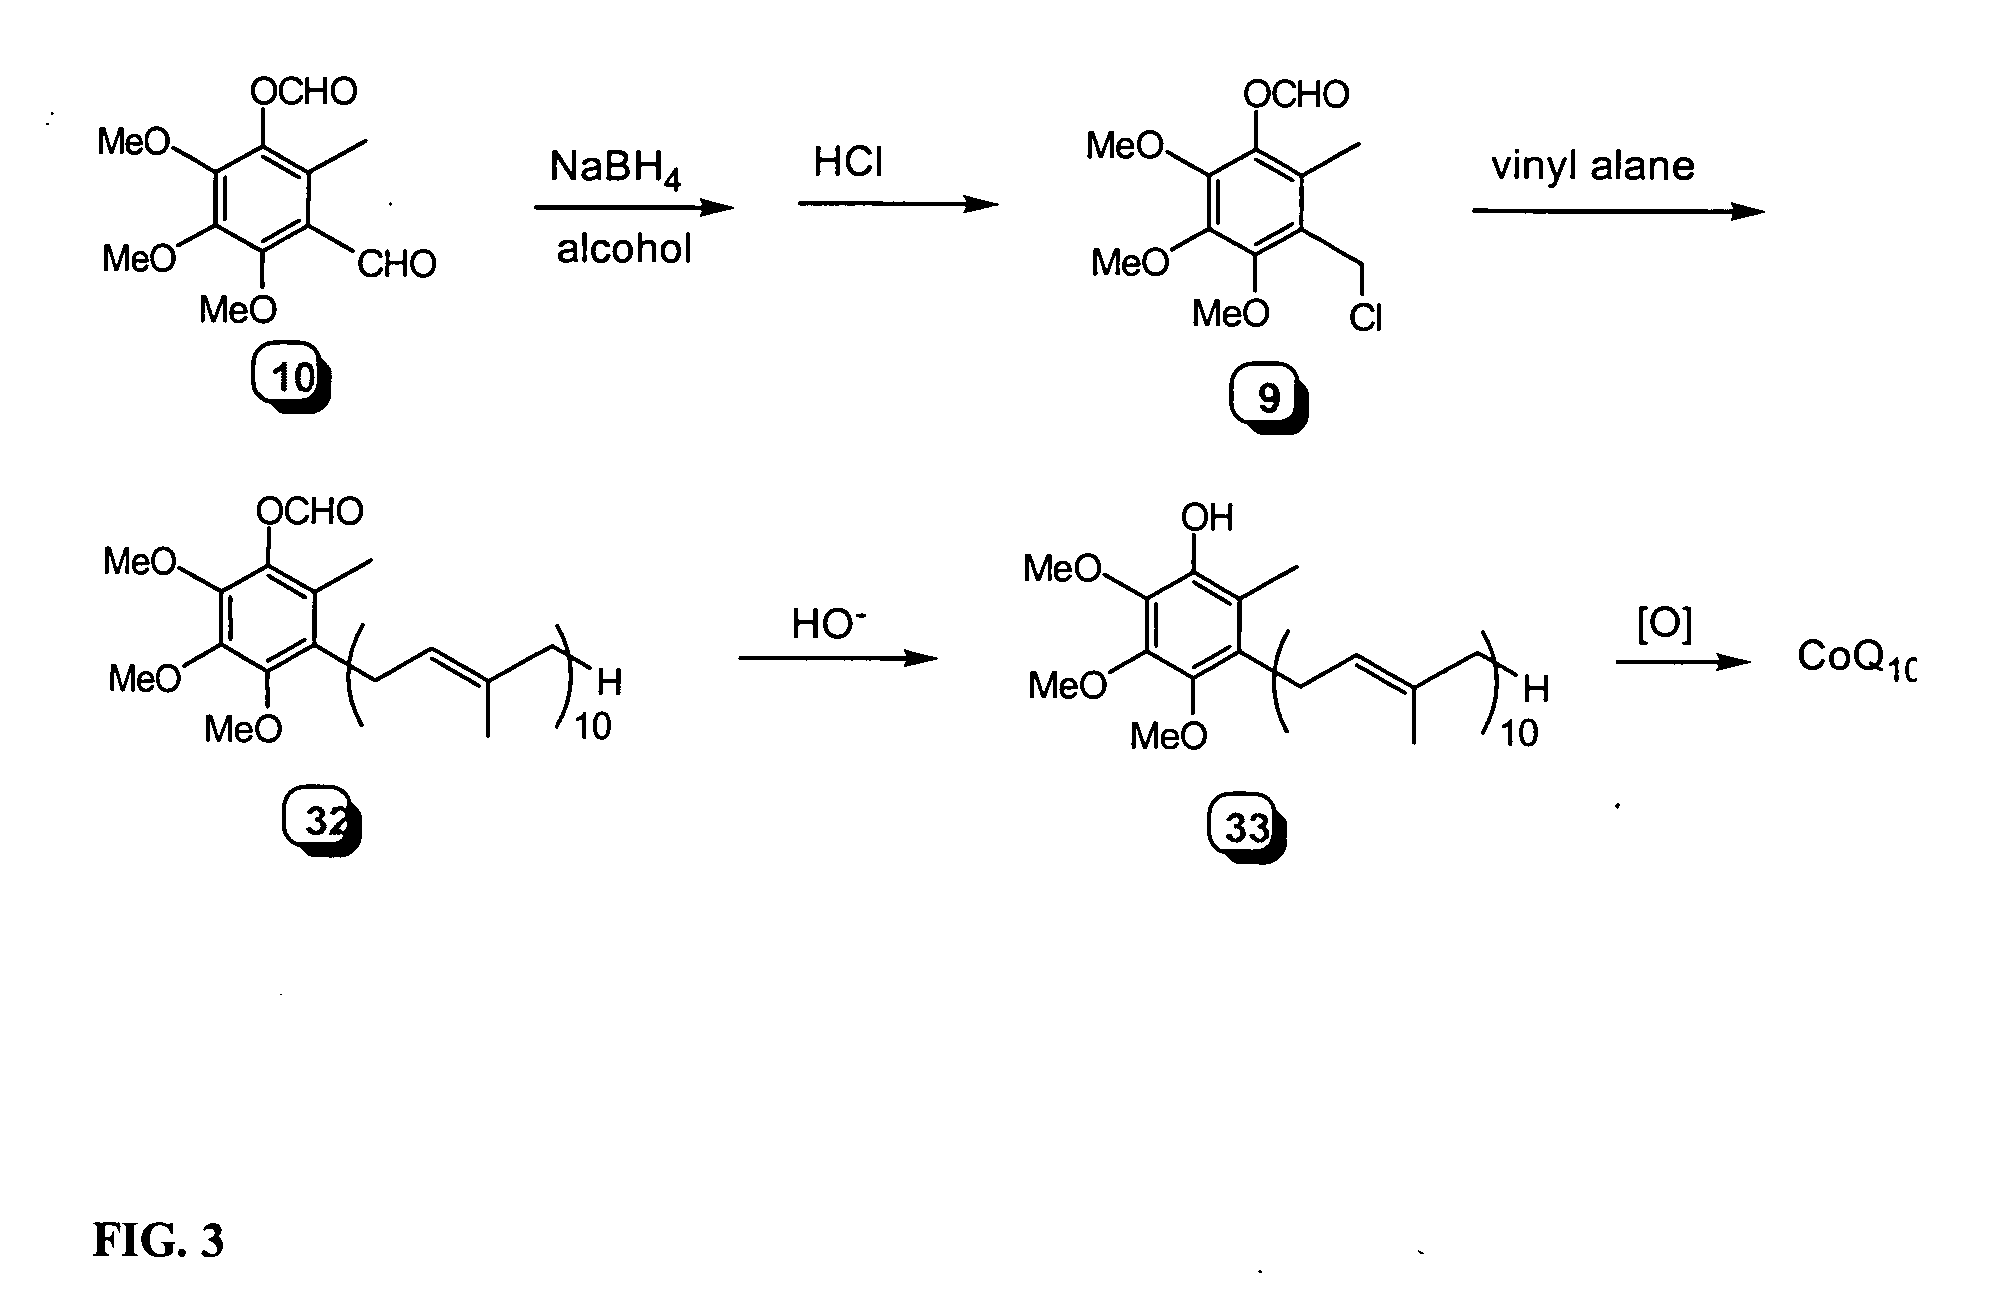 Practical, cost-effective synthesis of ubiquinones